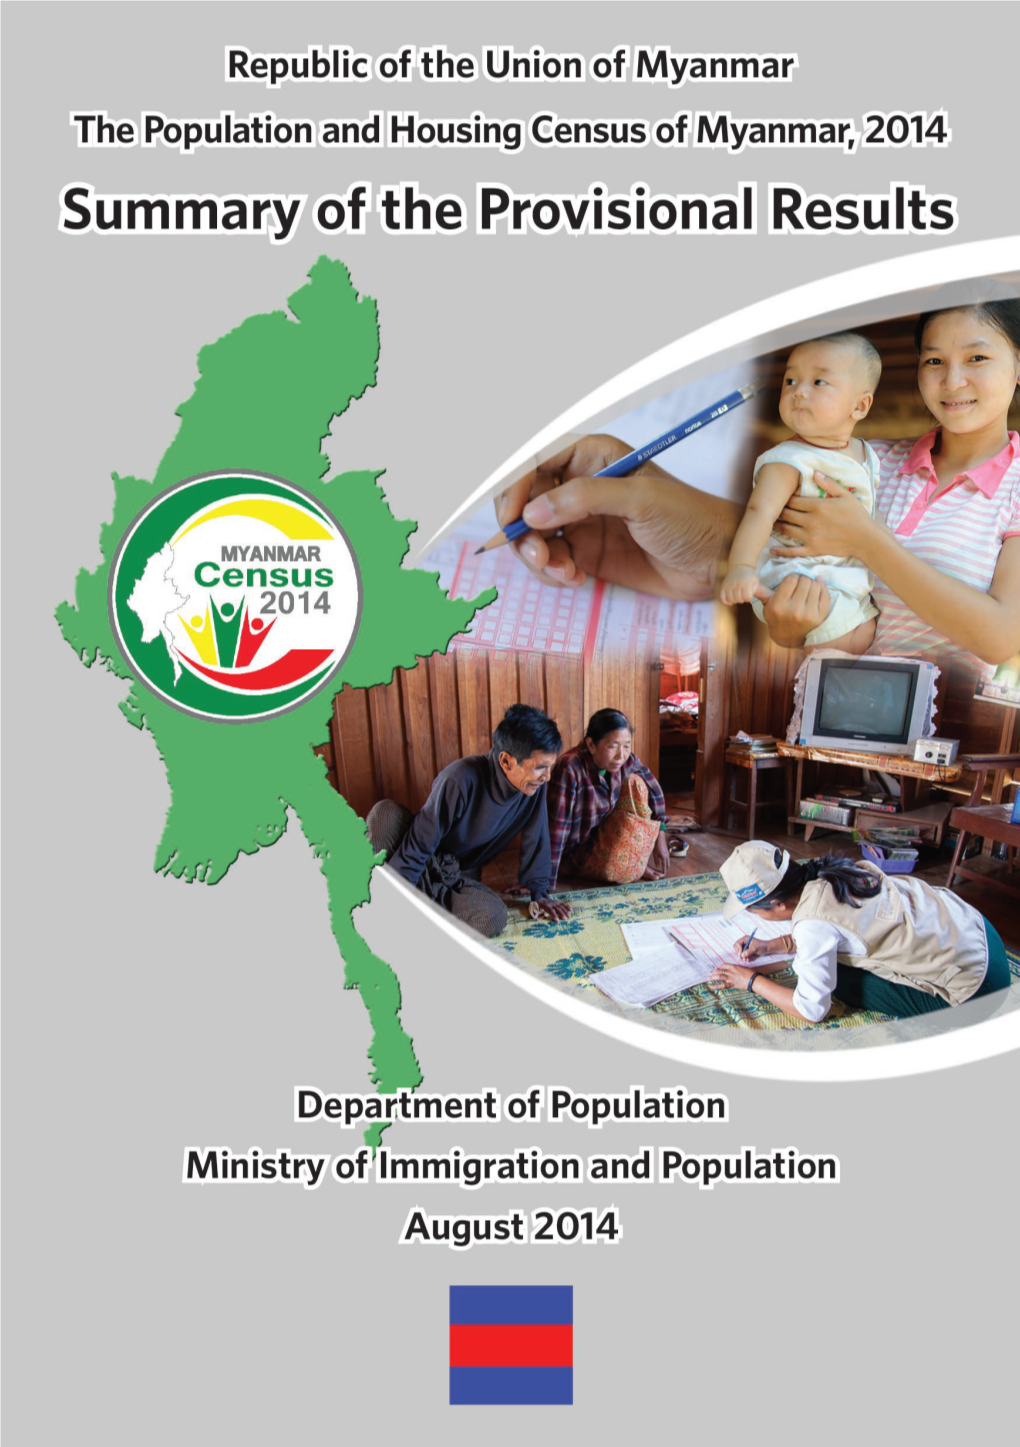 2. Provisional Population of Myanmar the Provisional Results of the 2014 Myanmar Census Show That the Total Population of Myanmar Is 51,419,420